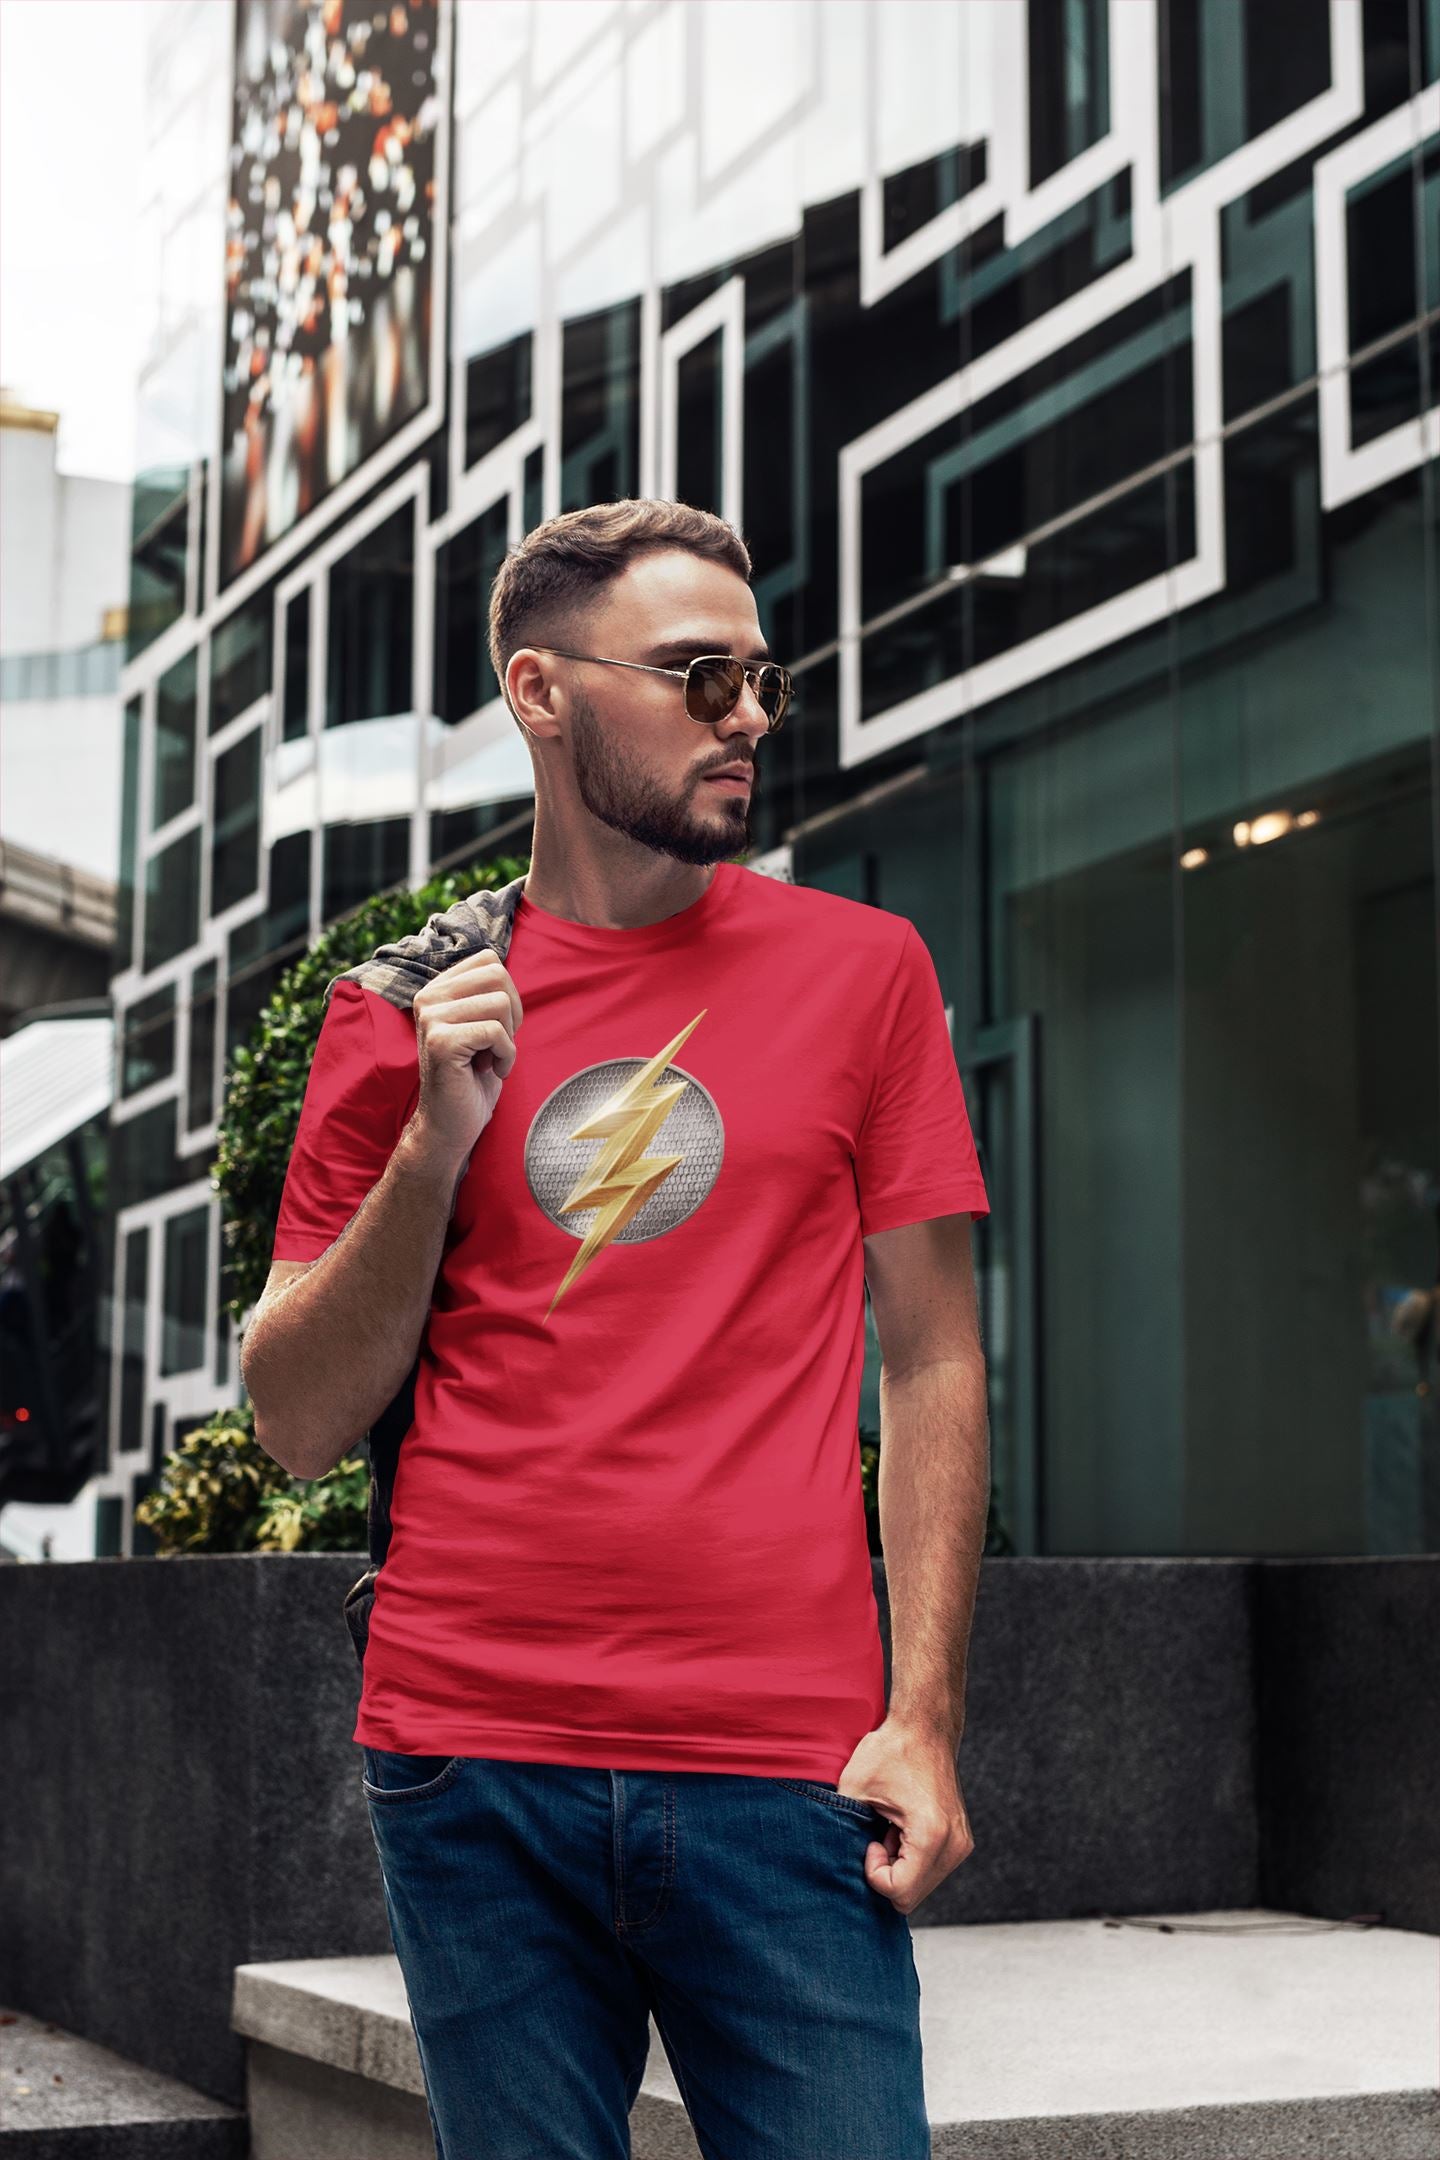 The Flash Official Logo Red T Shirt for Men and Women freeshipping - Catch My Drift India